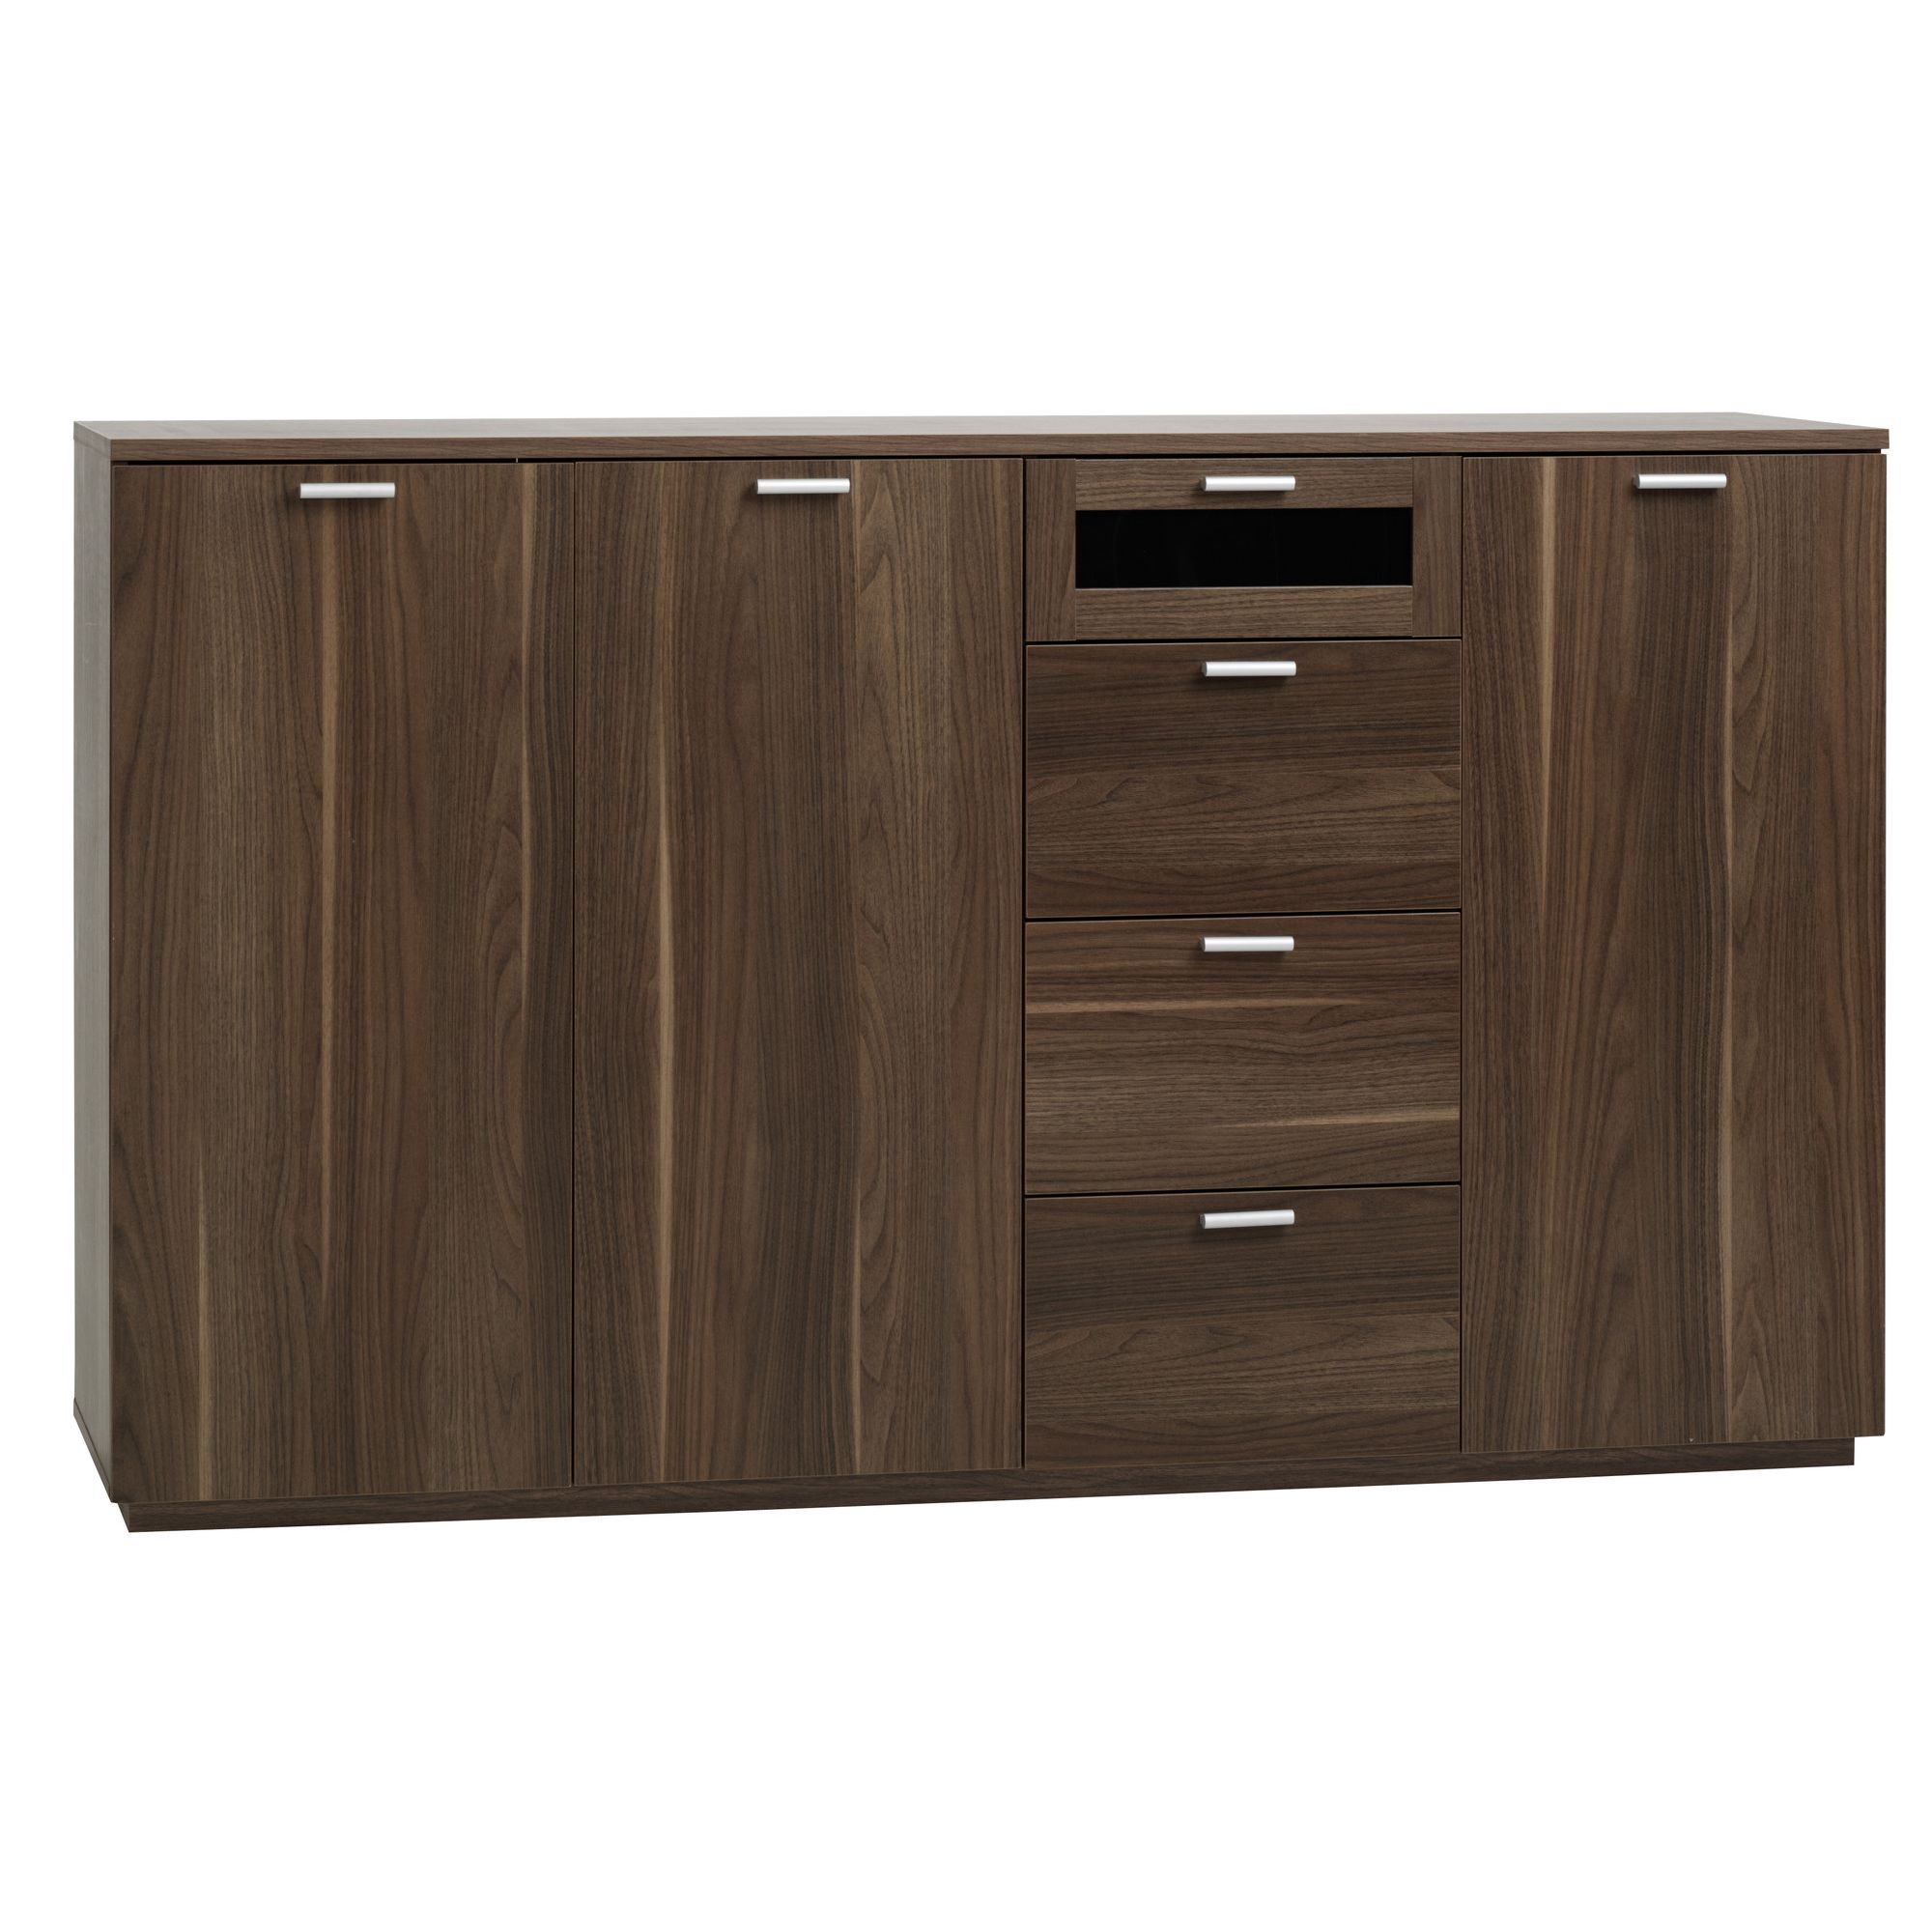 Tvilum New York Sideboard with Three Doors and Four Drawers in Dark Walnut at Tescos Direct